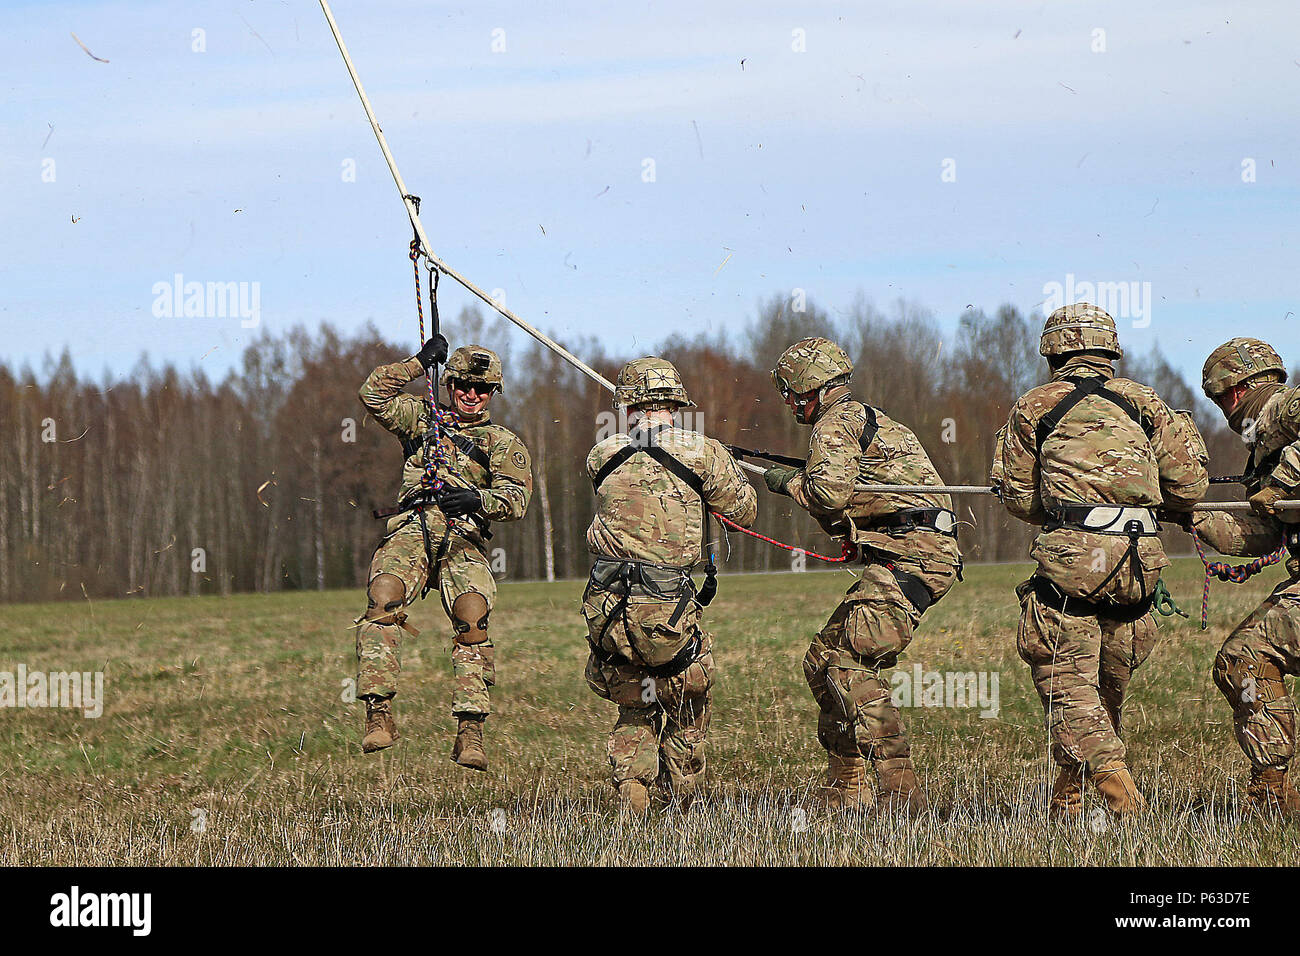 U.S. Army Soldiers assigned to Headquarters and Headquarters Troop, 3rd Squadron, 2nd Cavalry Regiment, pull a rope attached to a Latvian MI-17 helicopter as they land during special purpose insertion extraction training, Lielvarde Air Base, Latvia, April 21, 2016. Allies from Latvia, Canada, Lithuania and Germany participated in the event, which included cold and hot load training on UH-60 Blackhawk helicopters and fast rope insertion extraction exercises.  (U.S. Army photo by Sgt. Paige Behringer) Stock Photo